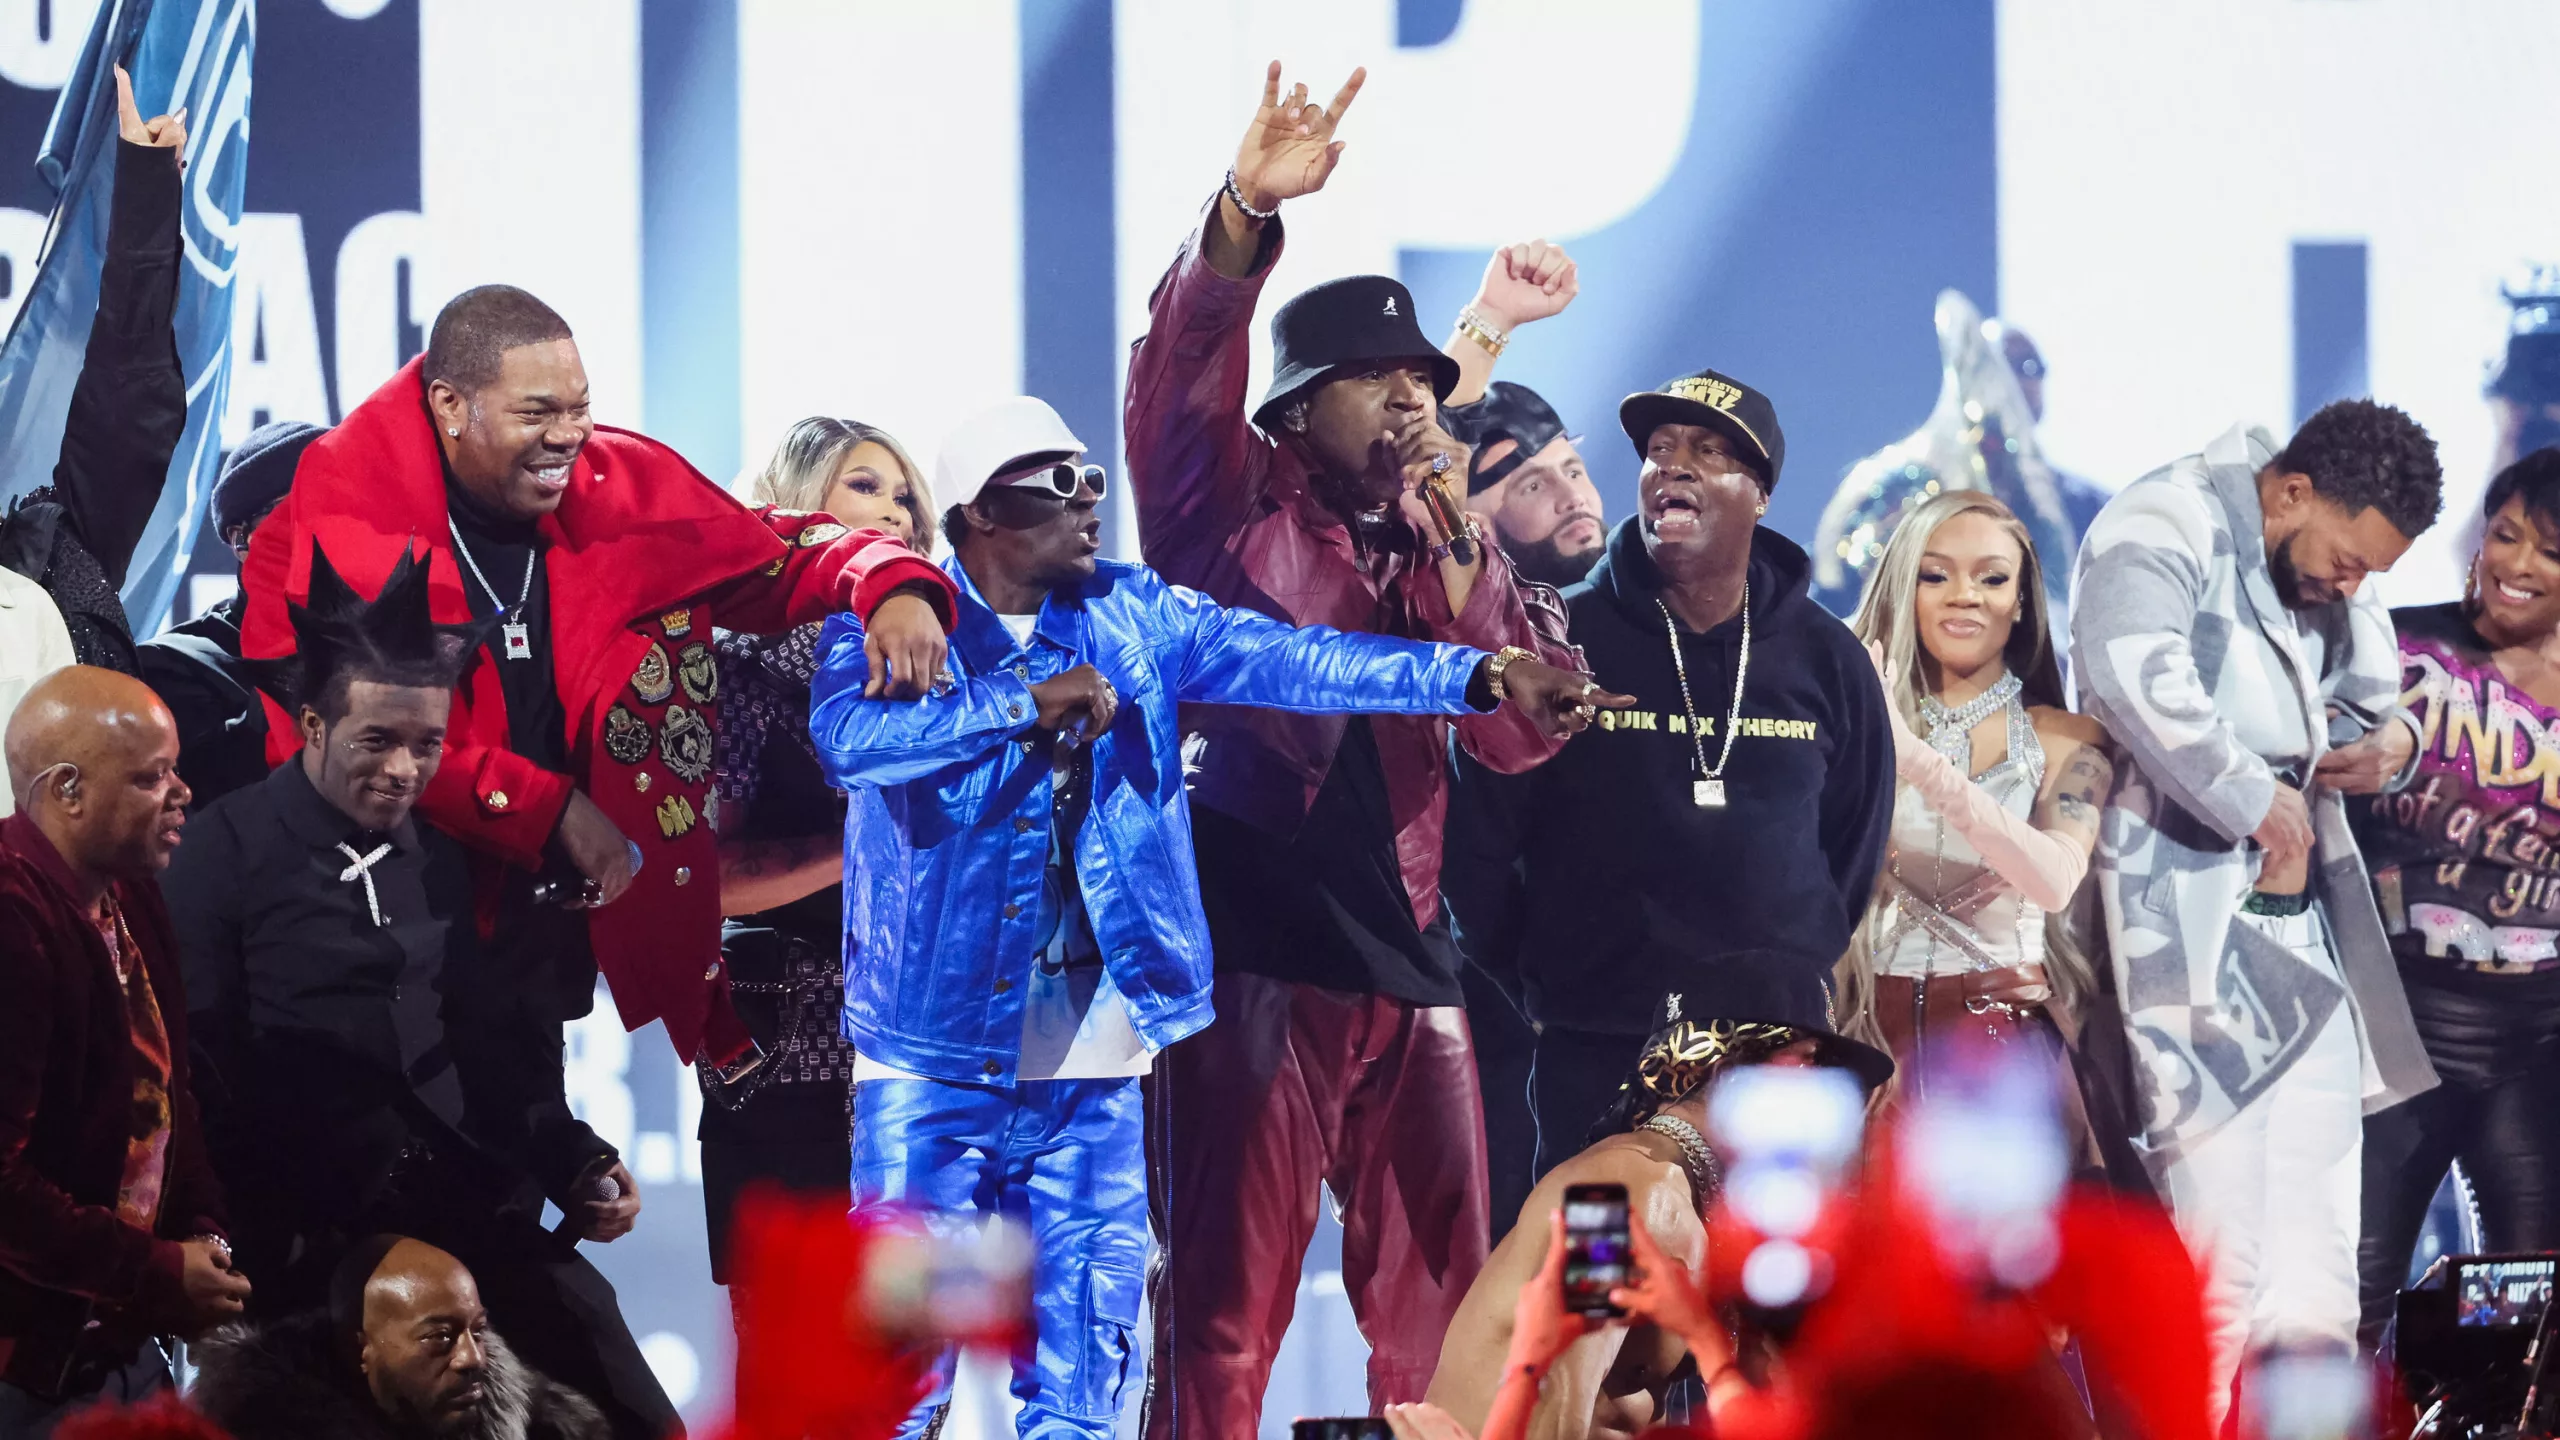 Read more about the article Pioneer Hip Hop Group Not Included in Epic Grammy’s Performance